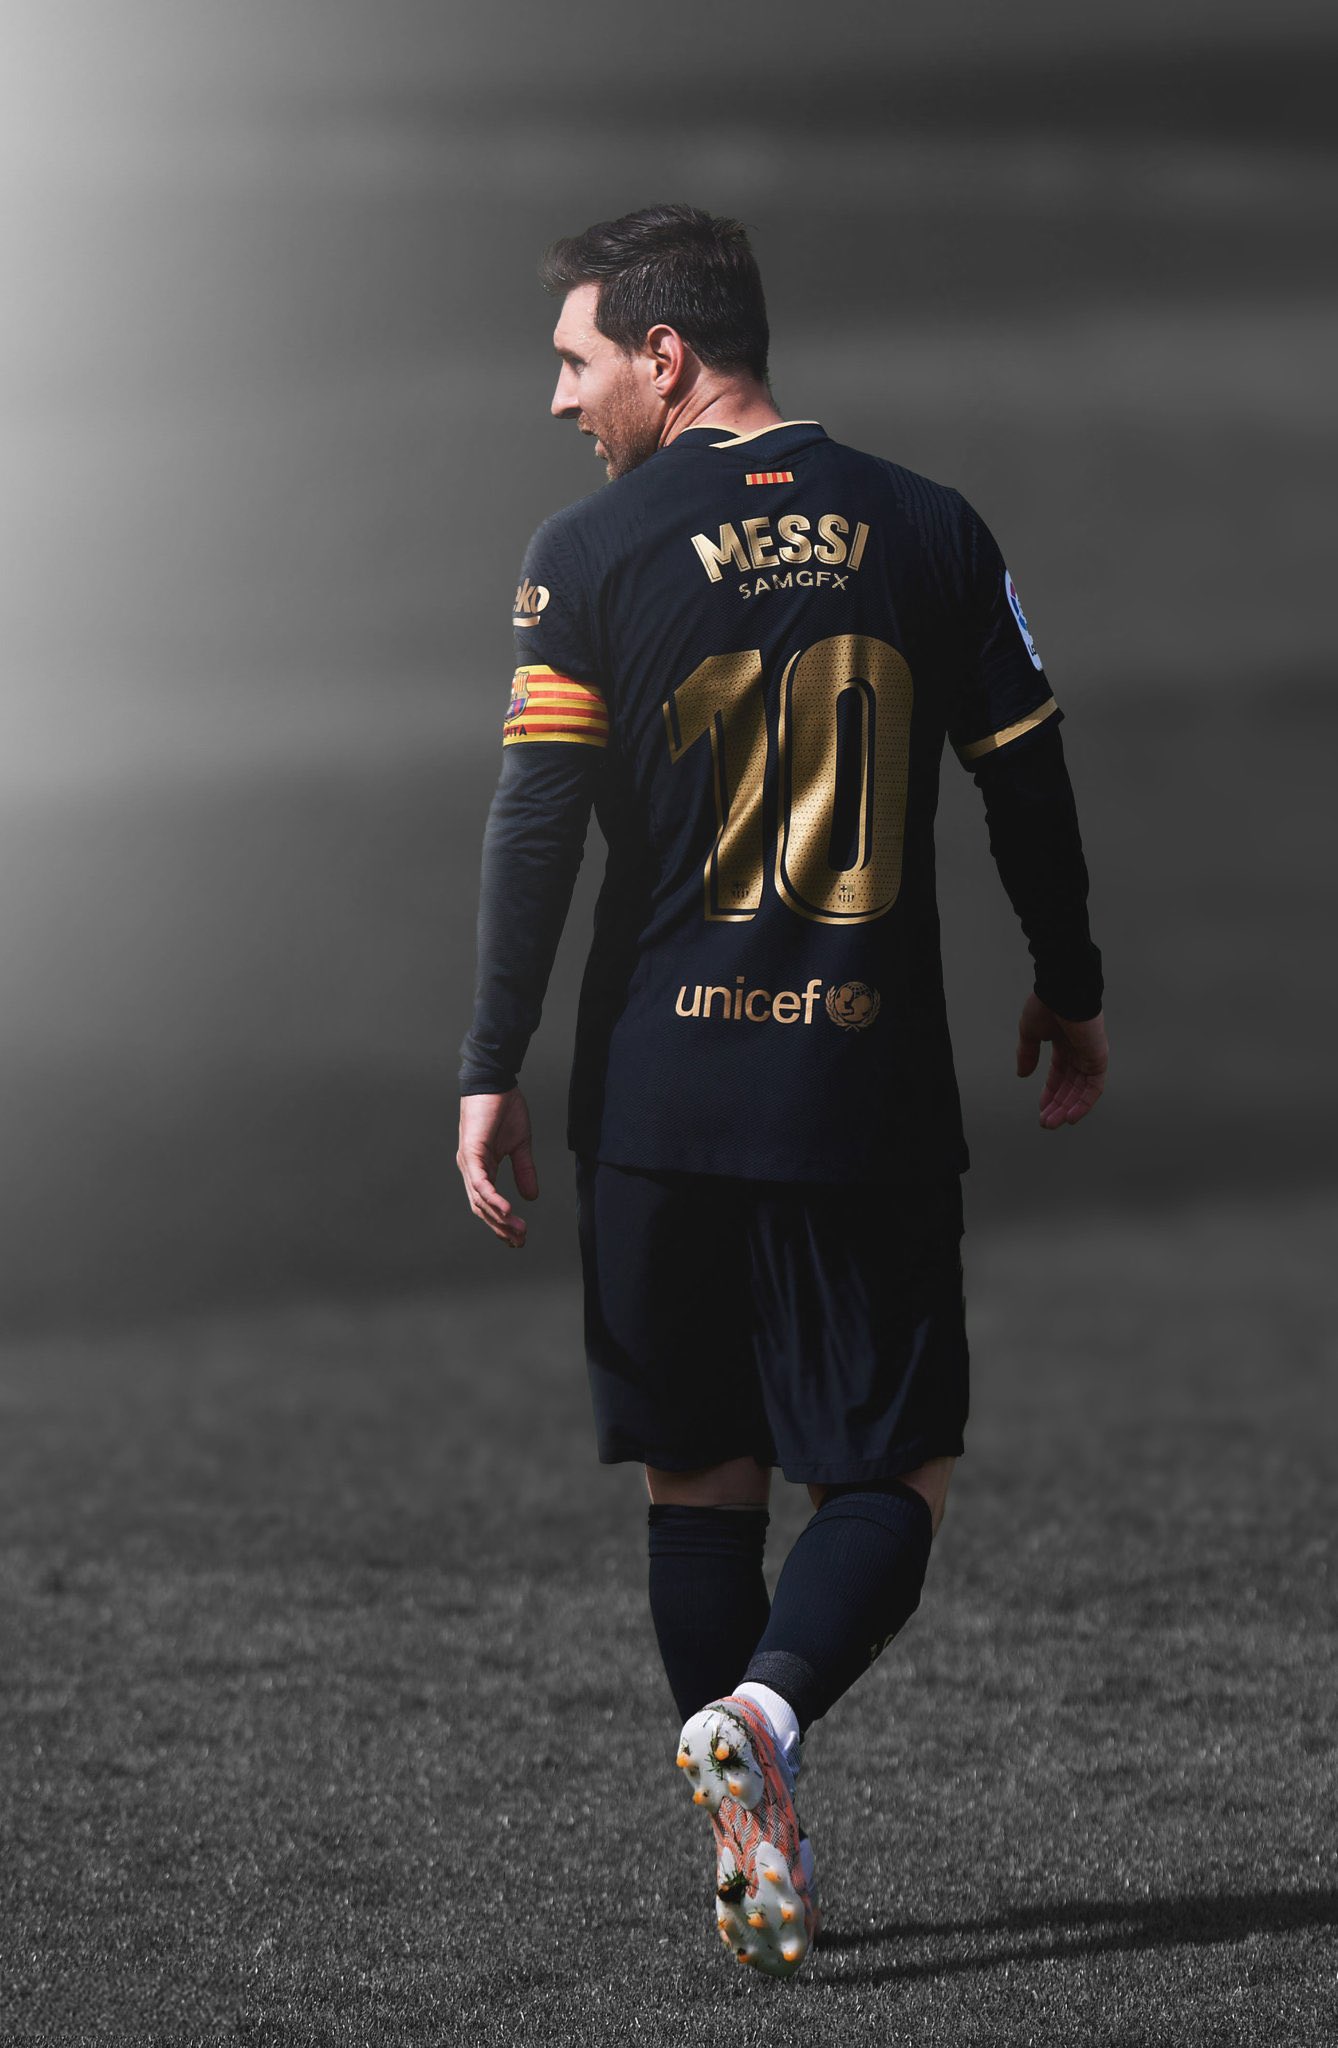 Happy 34th(  ) birthday to Lionel Messi! The greatest player to ever do it. 